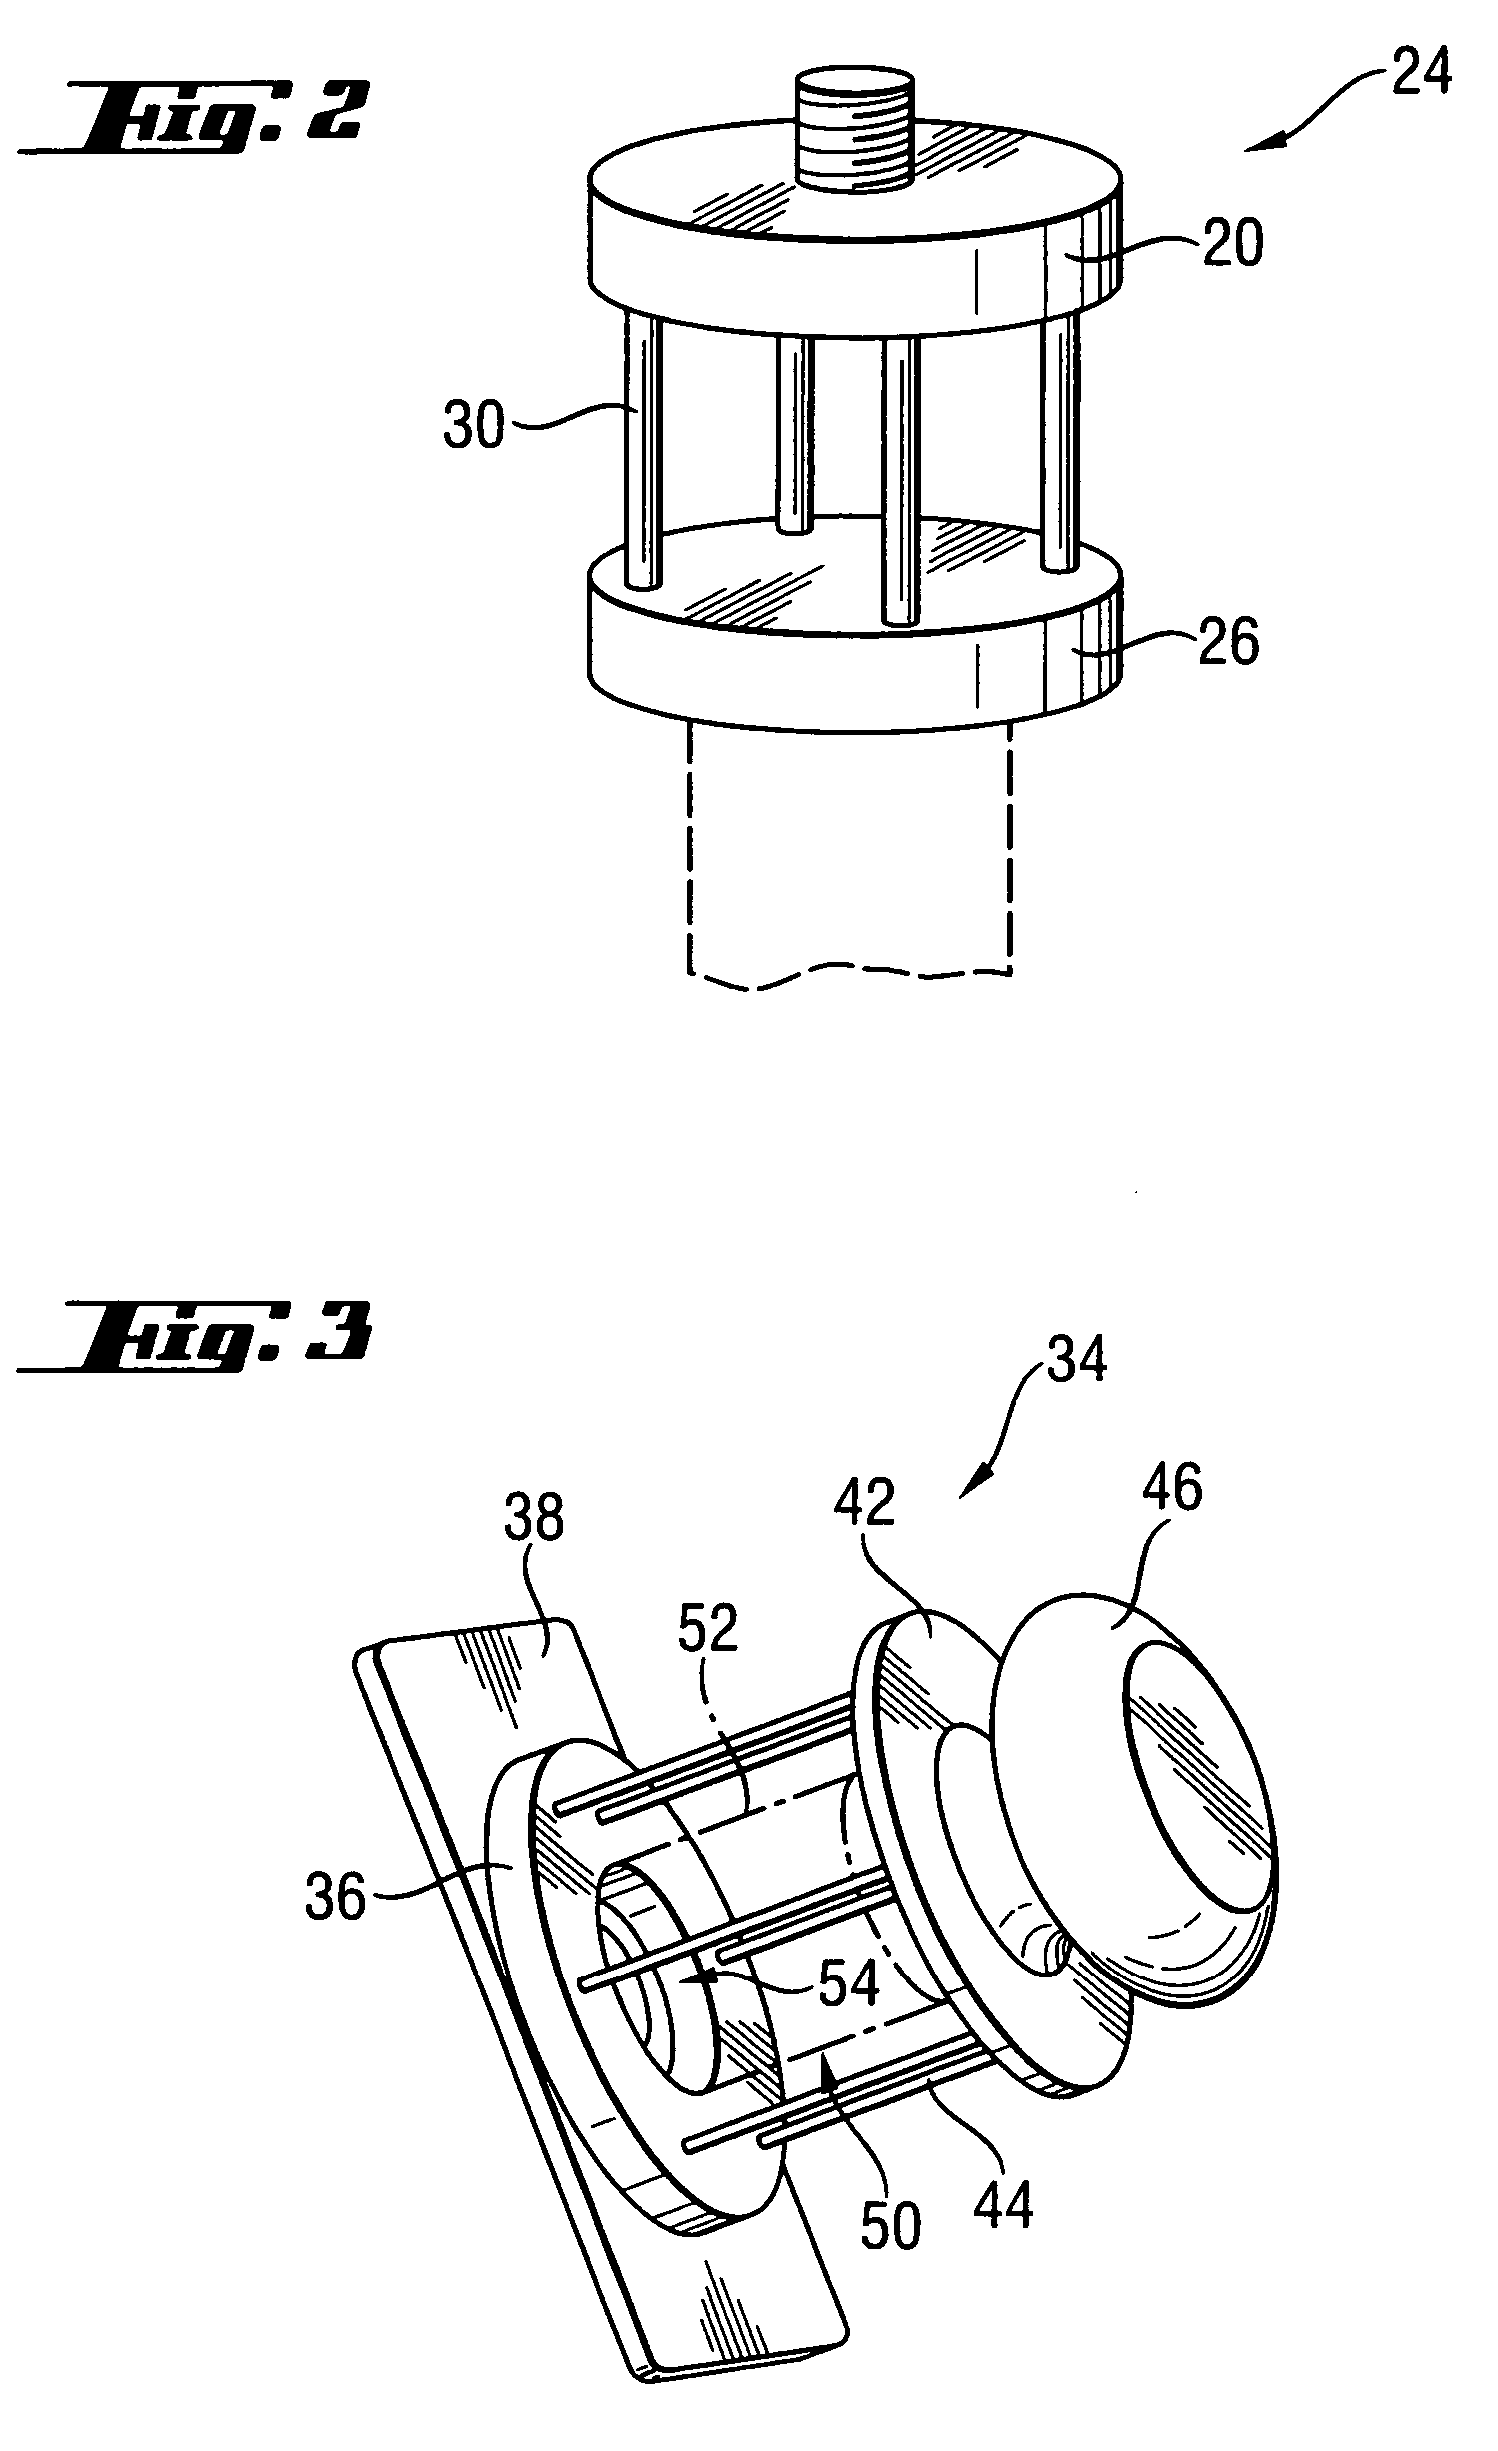 Handle for hand-held power tool